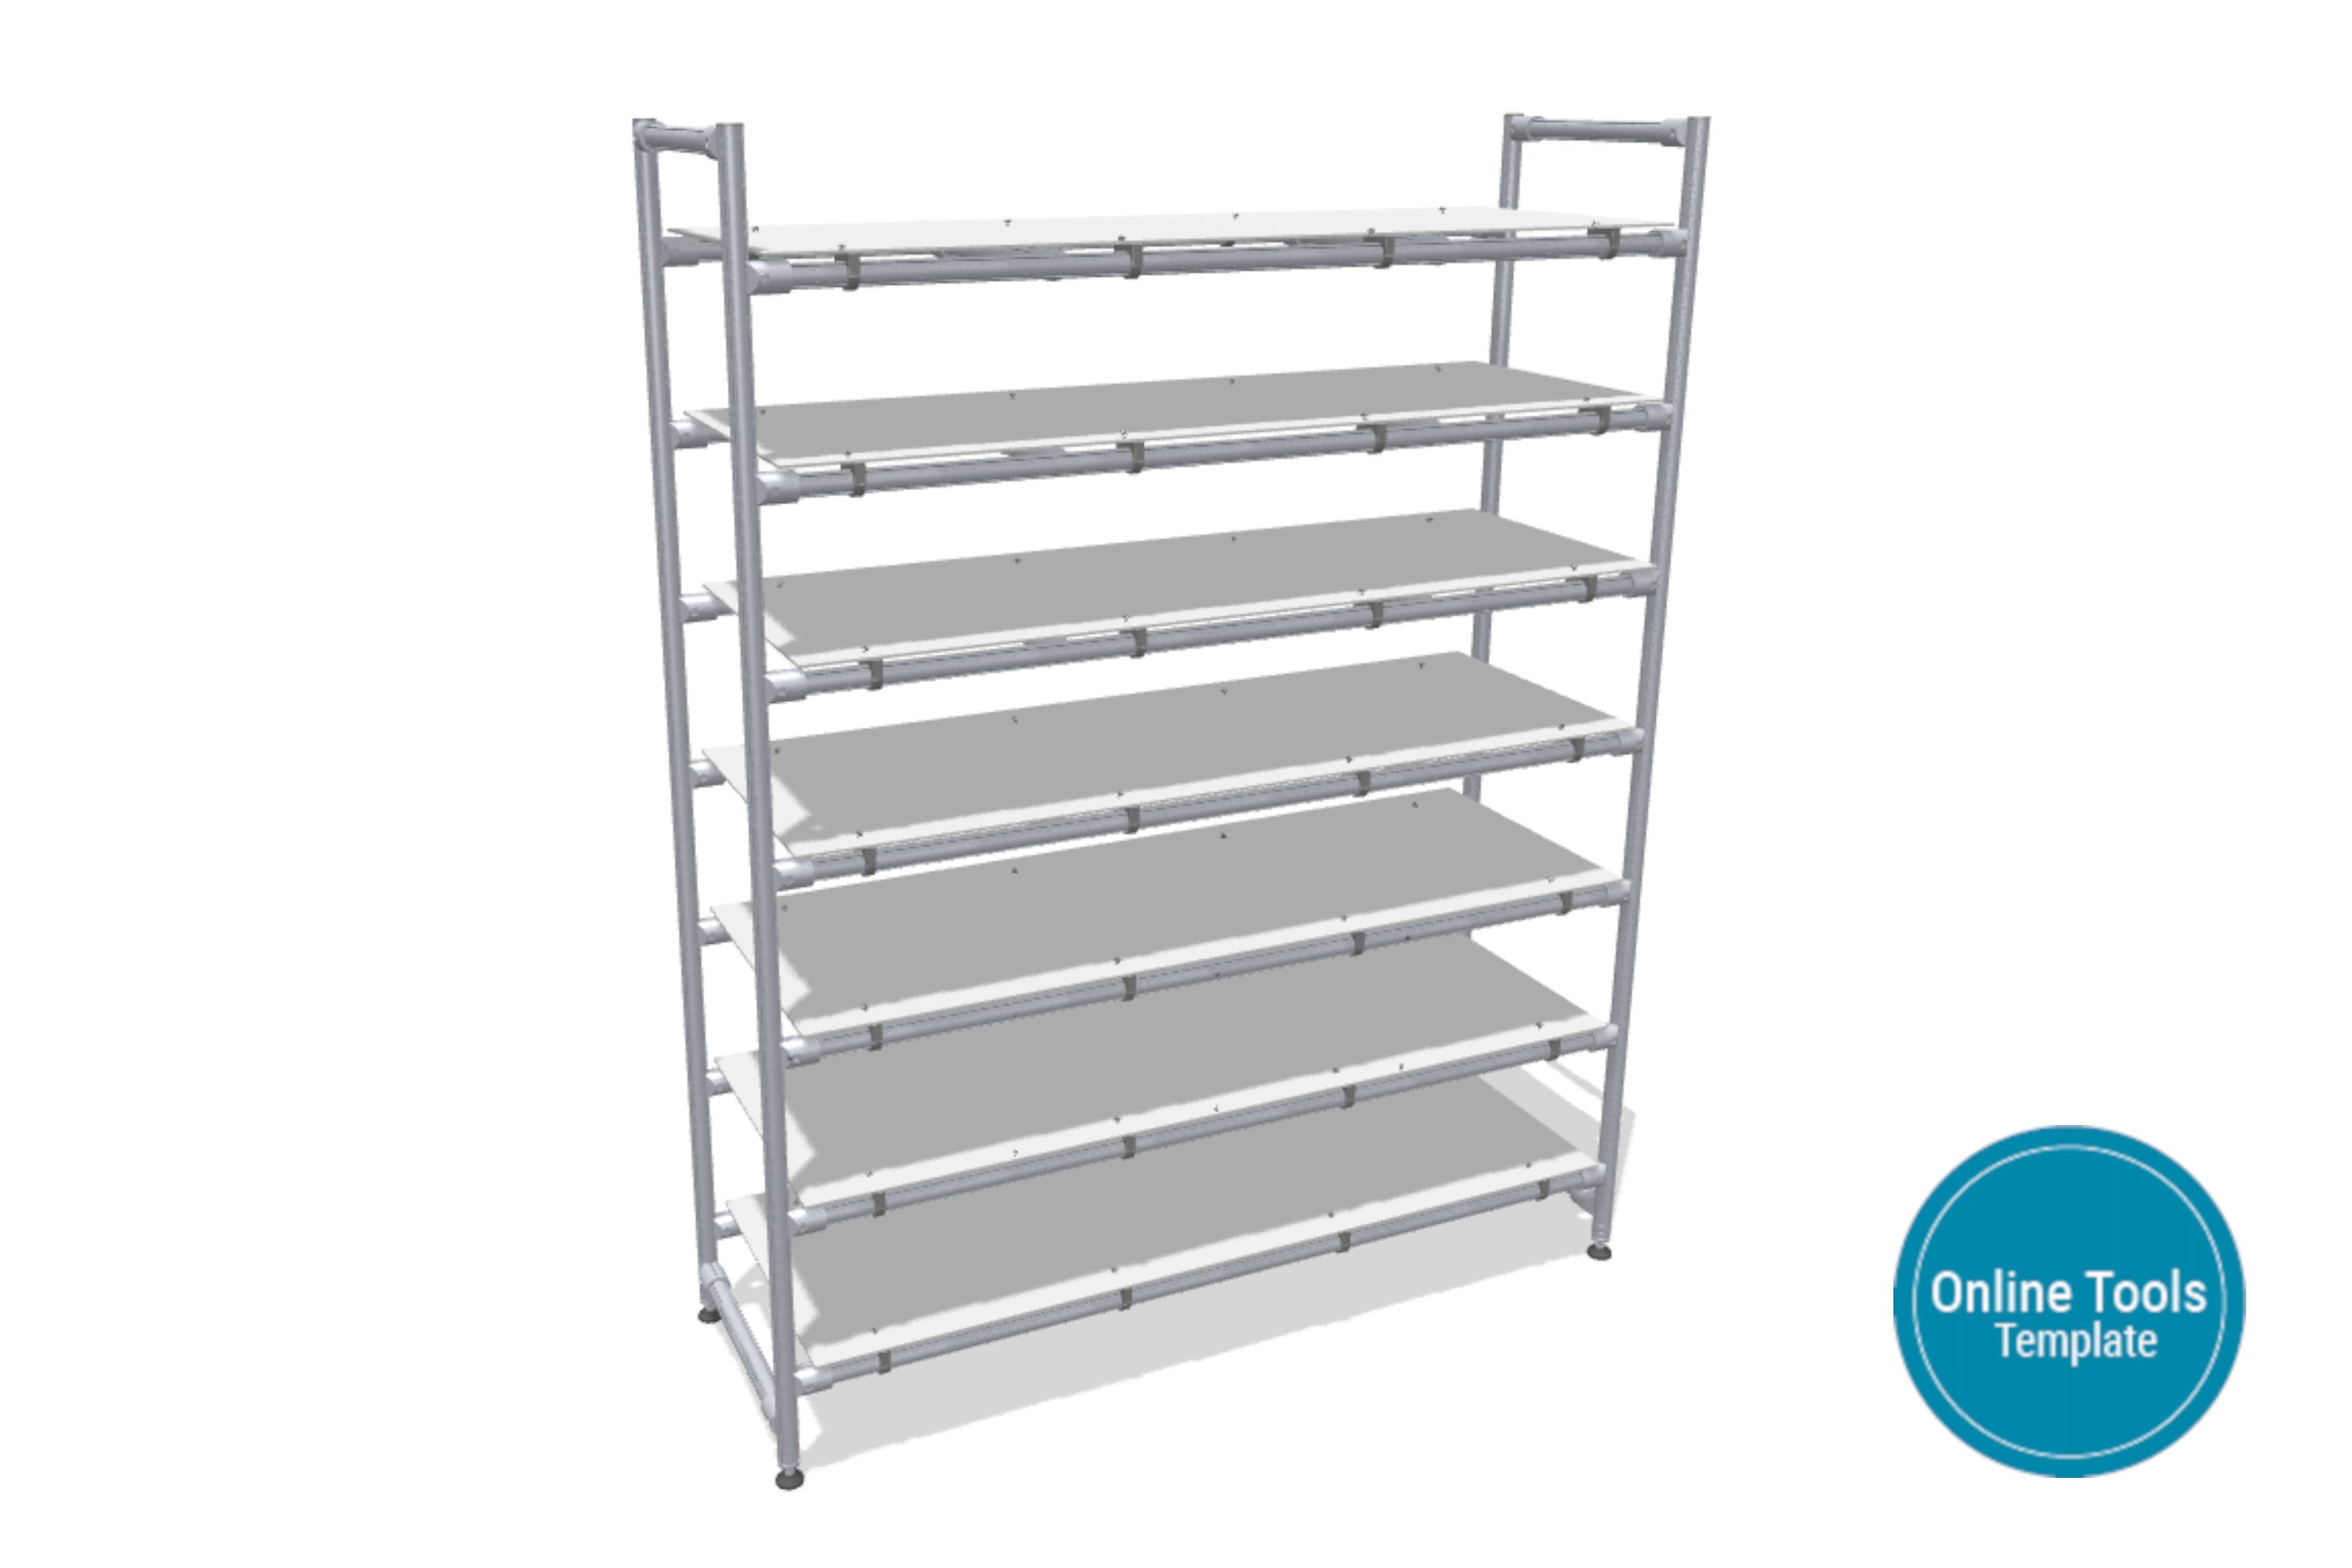 Tall warehouse rack based on Profile Tube System D30